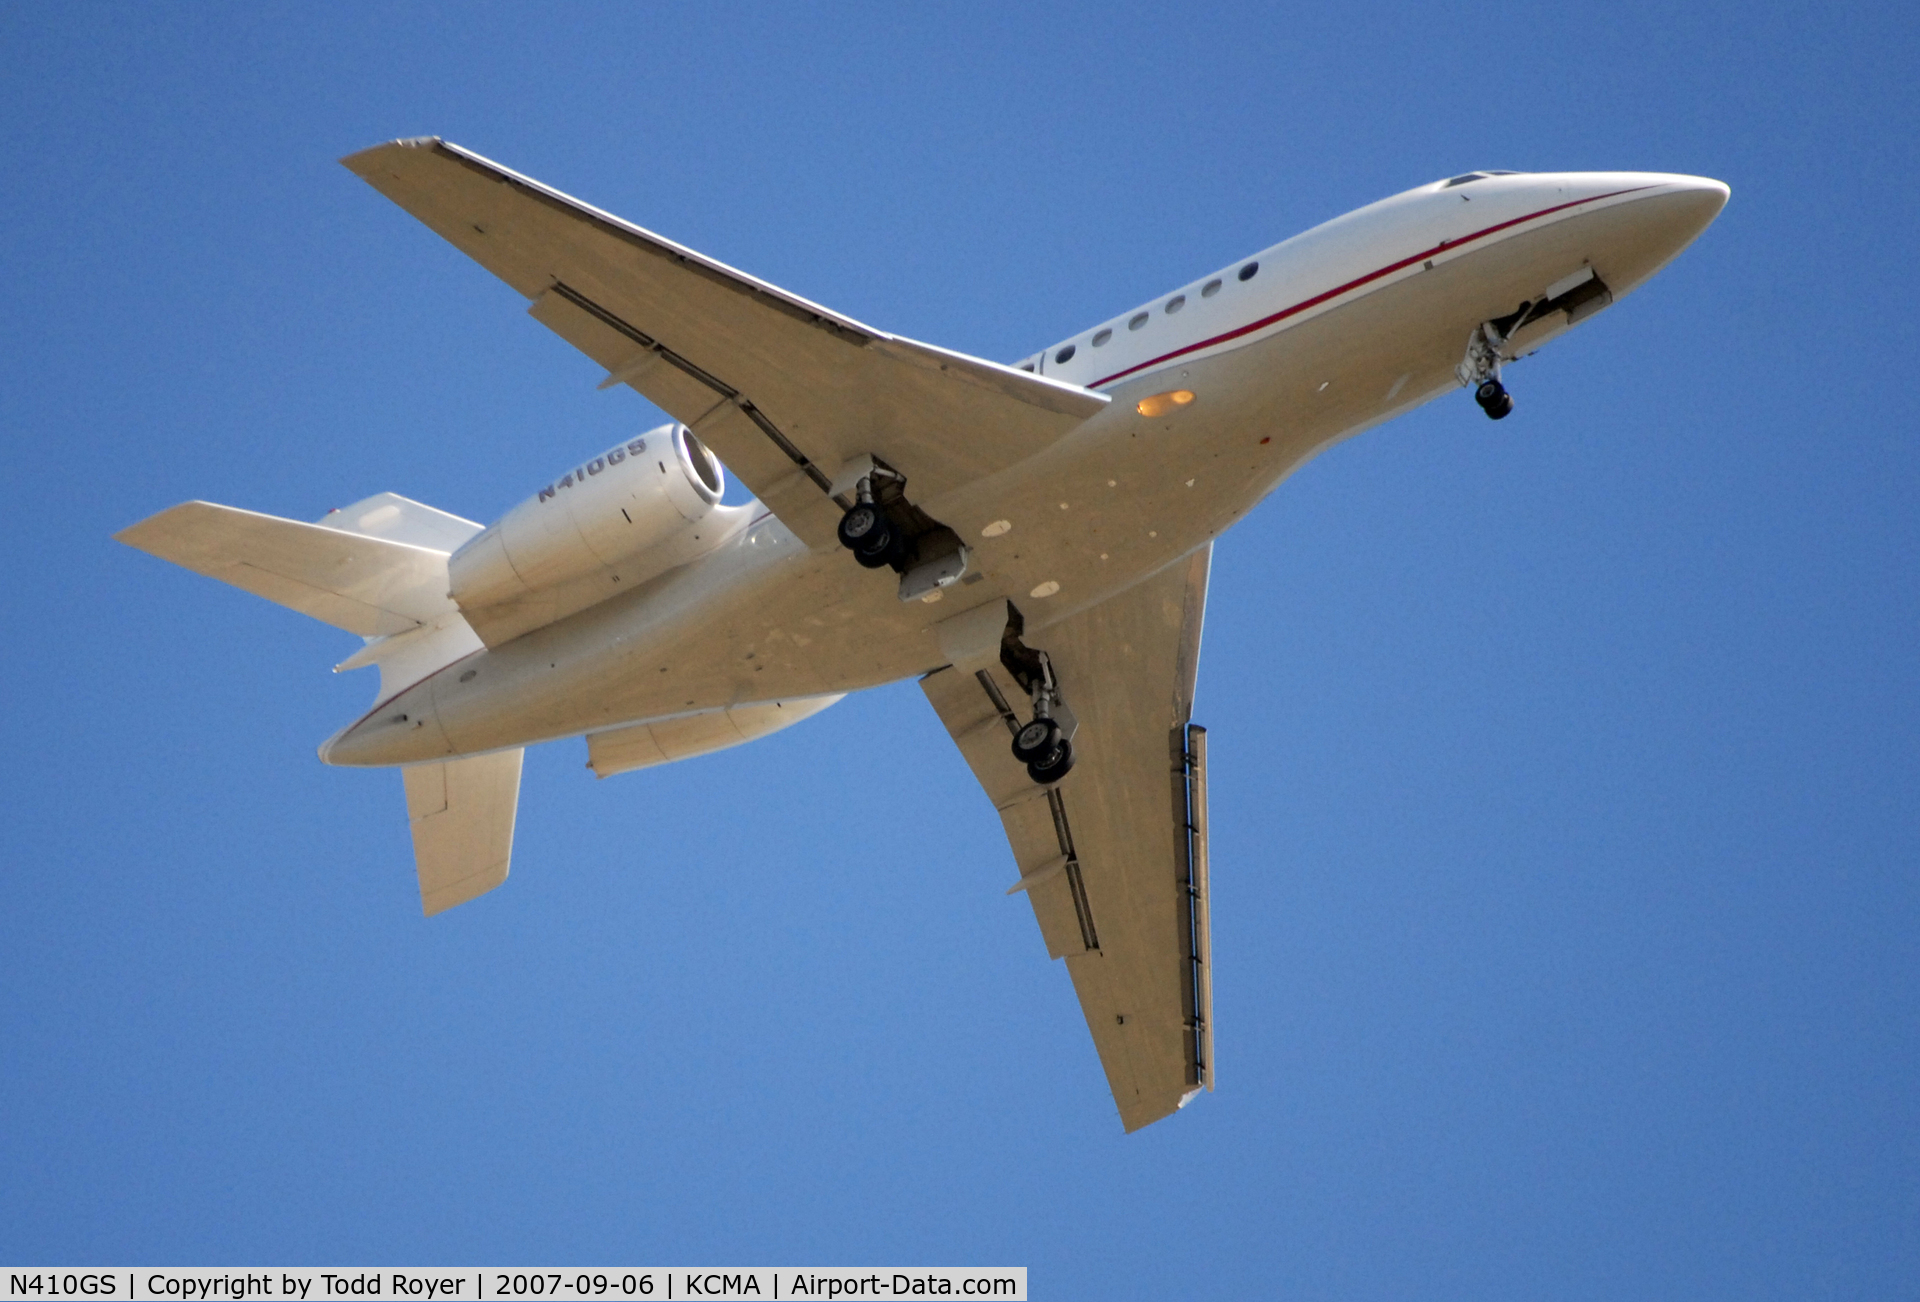 N410GS, 2000 Dassault Falcon 2000 C/N 112, From the backyard